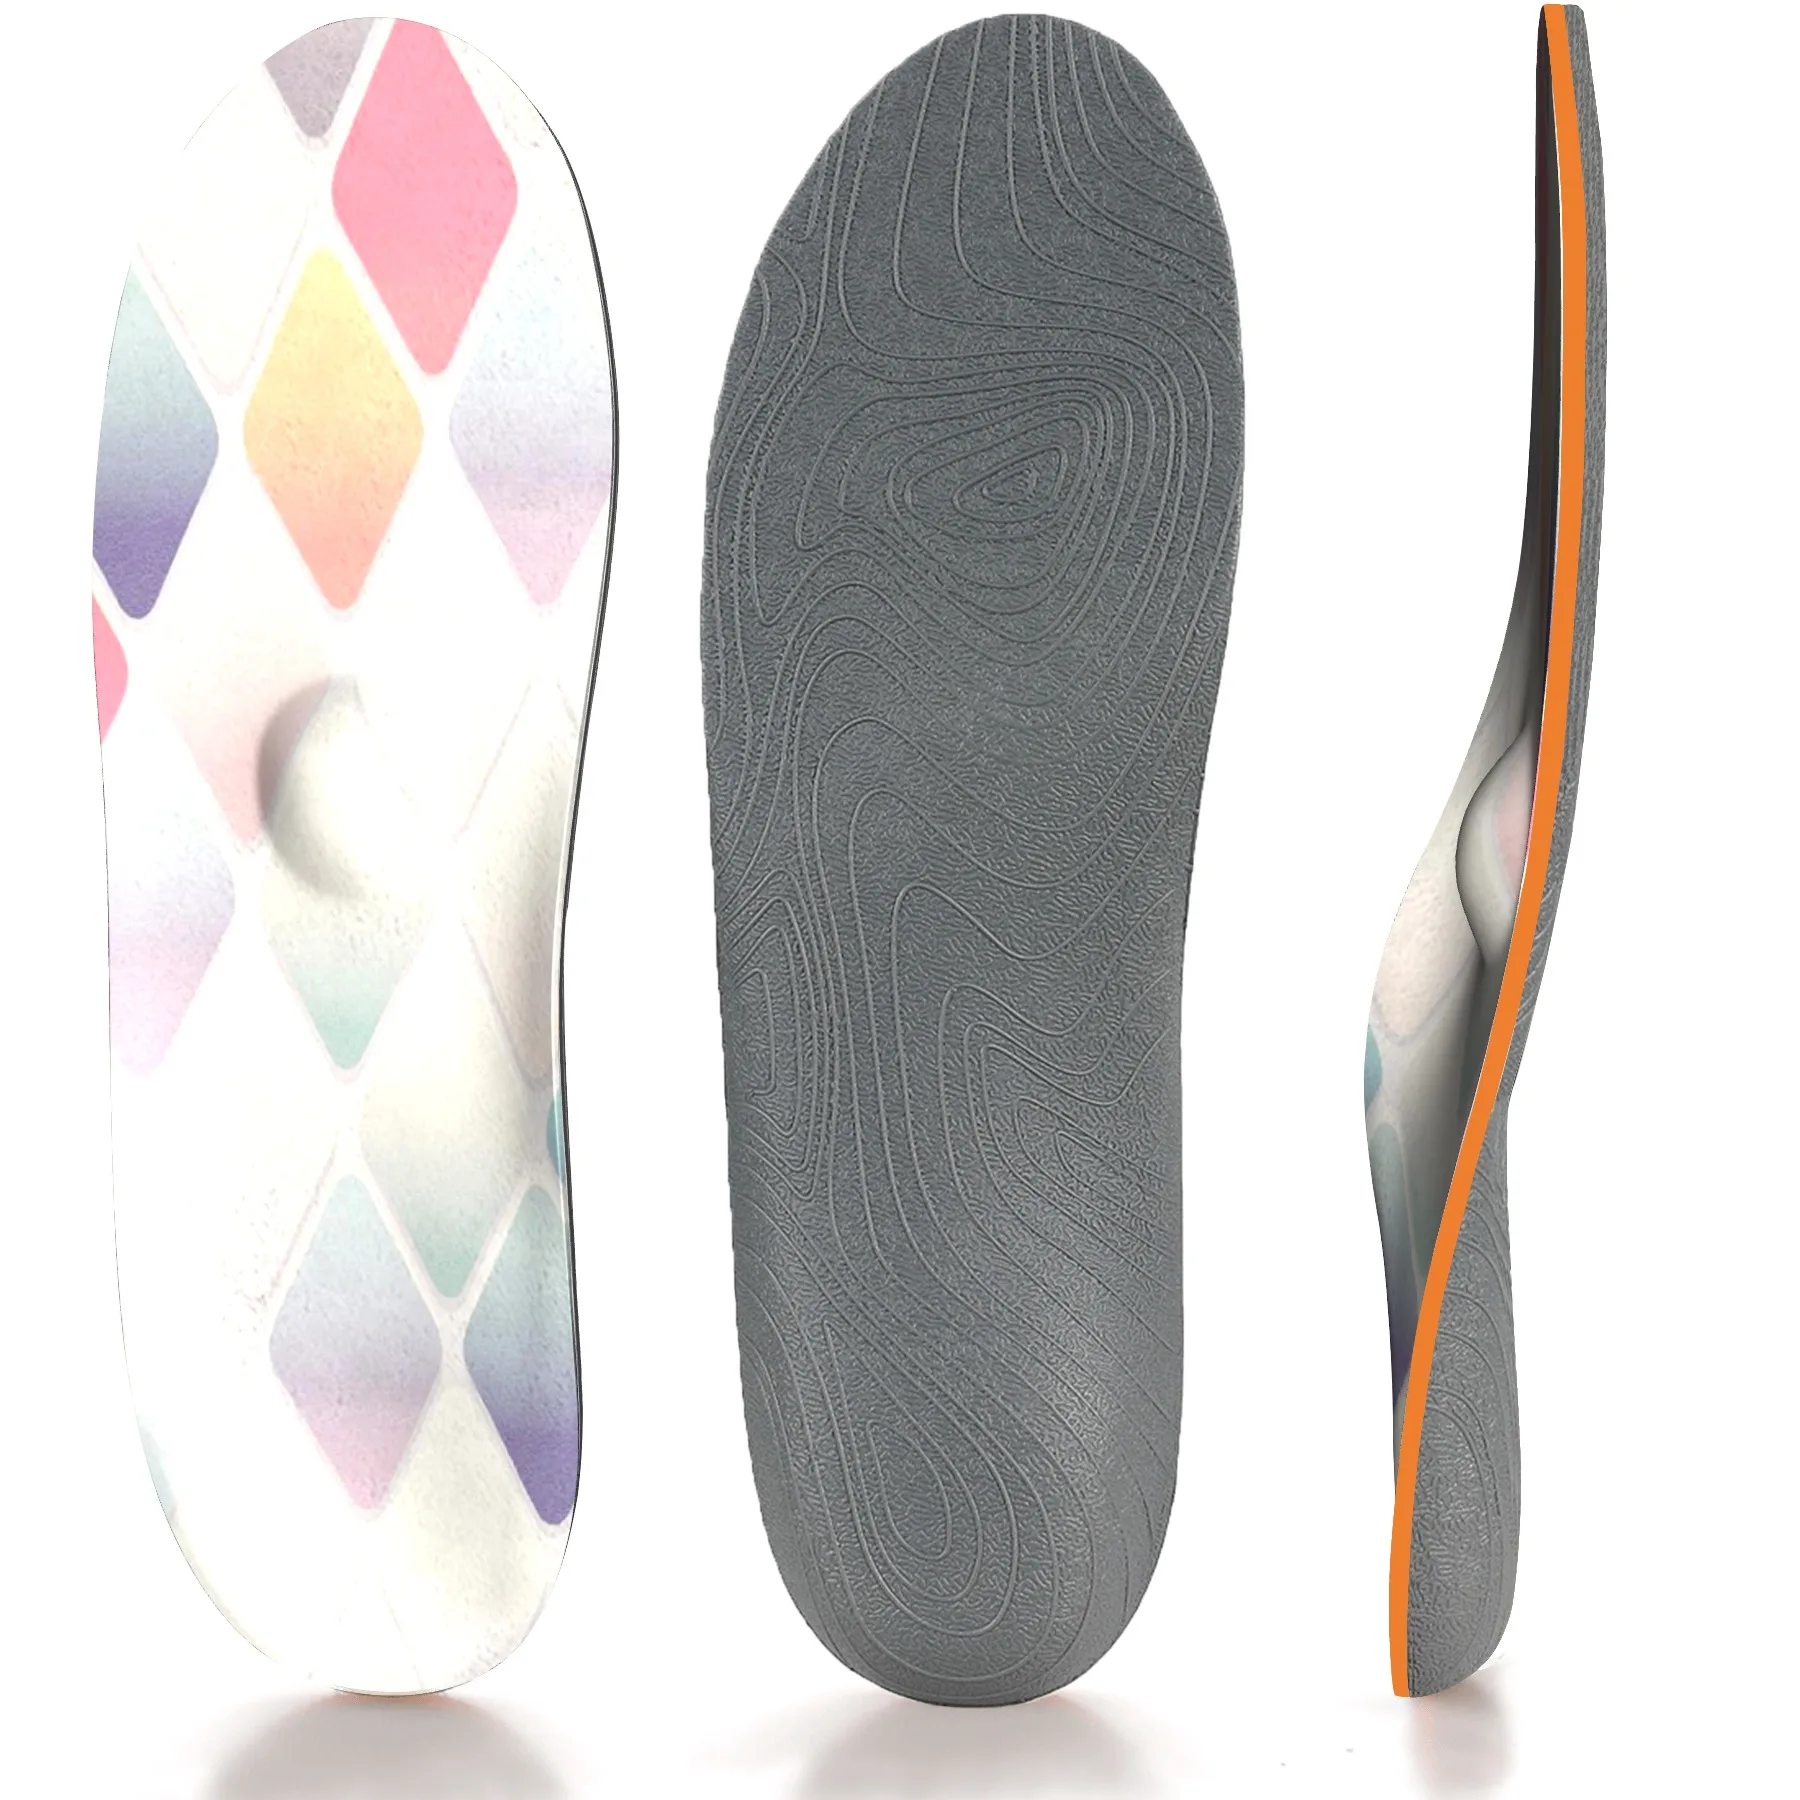 Full-Length Personality Insoles Non-slip Extreme Sports Female Shoes